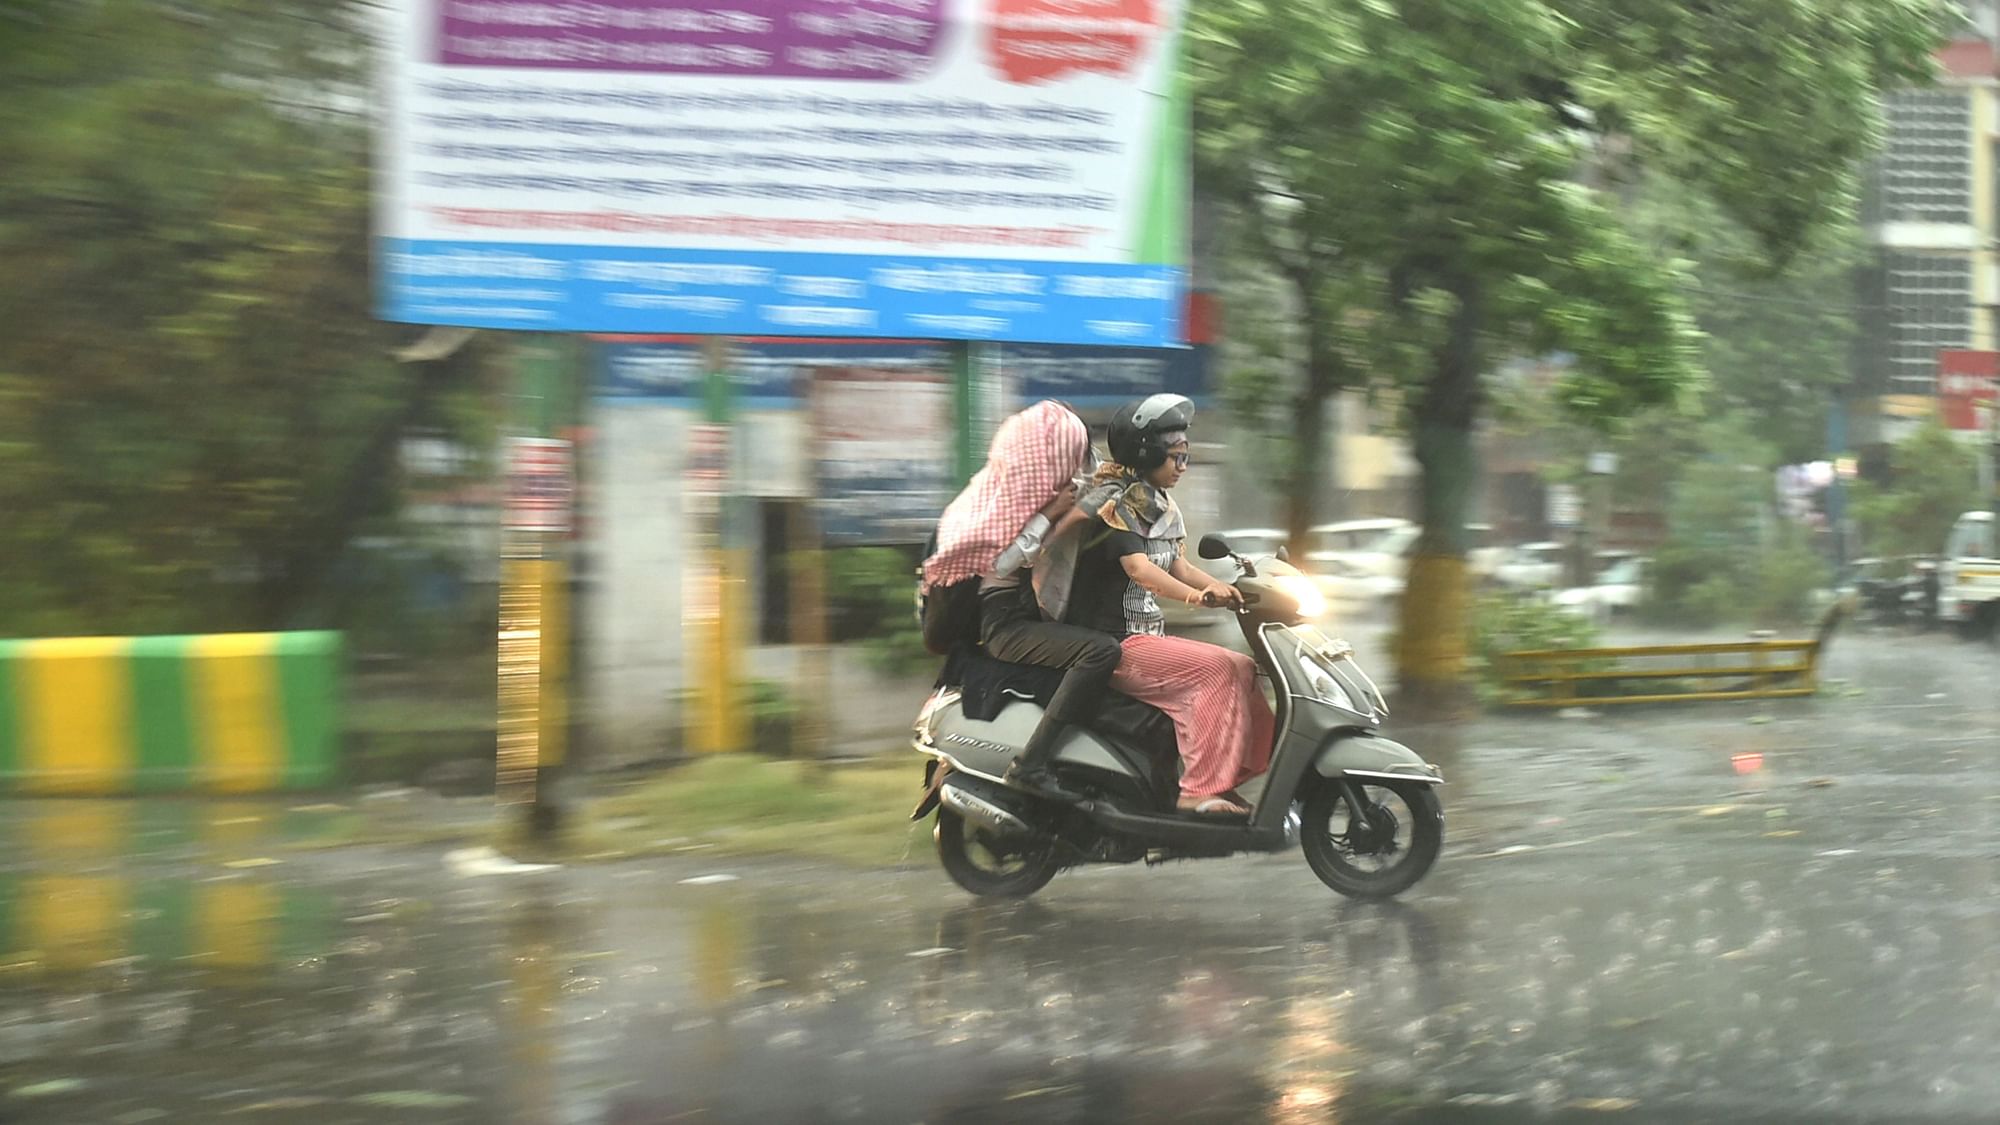 <div class="paragraphs"><p>After several days of scorching heat, Delhi and surrounding regions woke up to heavy rains and thunder on Monday, 23 May.</p></div>